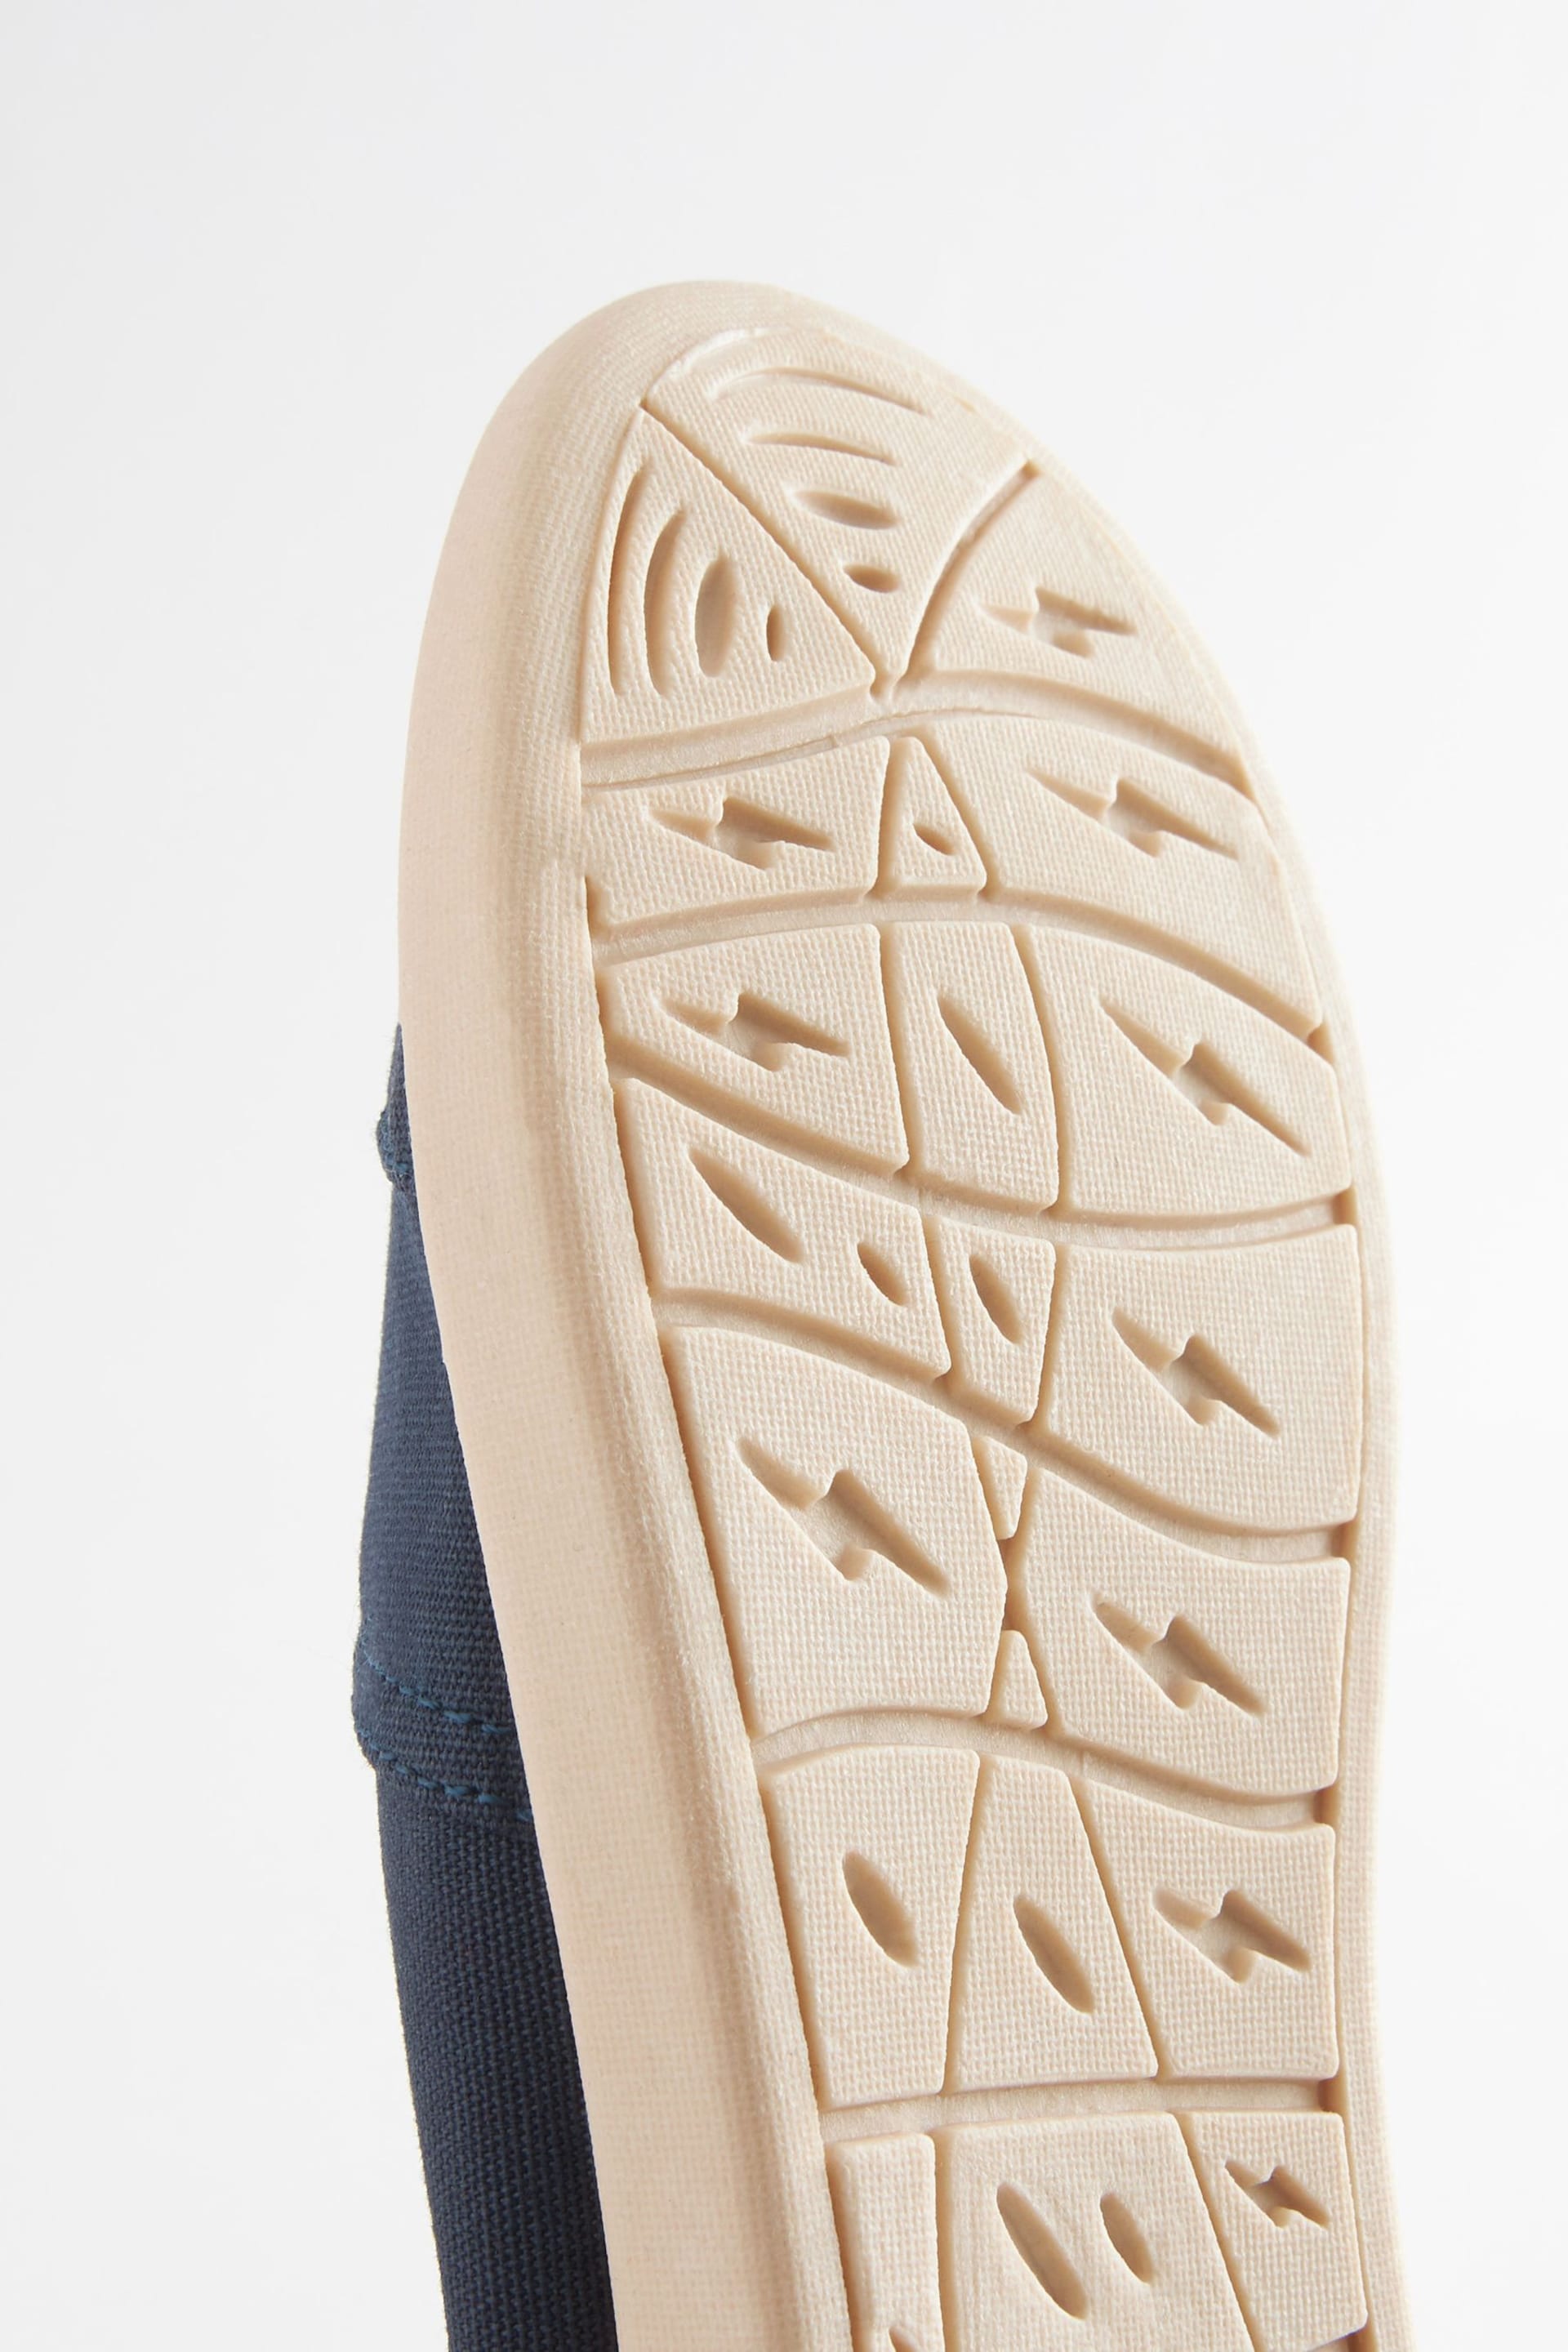 Navy Blue Canvas Slip-Ons Shoes - Image 4 of 4